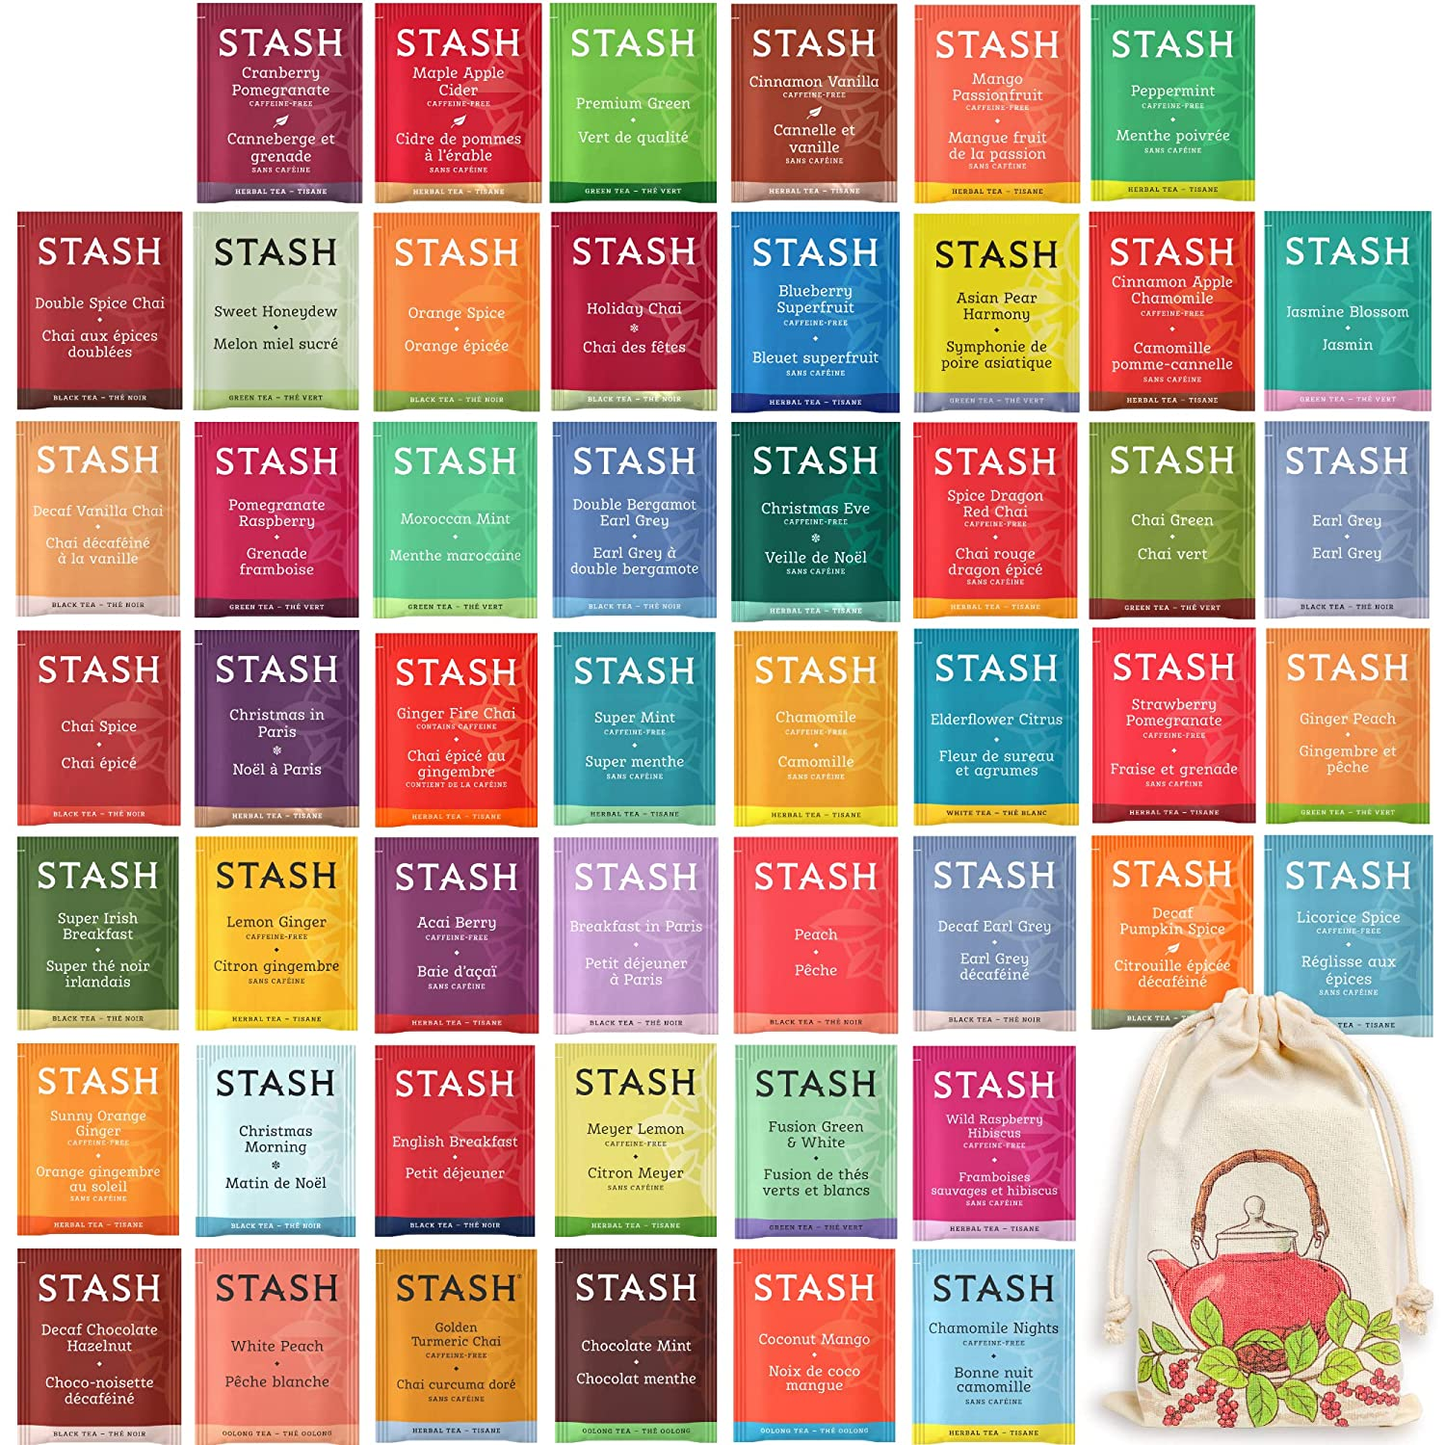 Tea Bags Variety Pack - Herbal and Decaf - Caffeine Free Assorted Teas - Tea Sets for Women and Men - 50 Ct, 25 Different Flavors - 100% Handmade Cotton Pouch Included